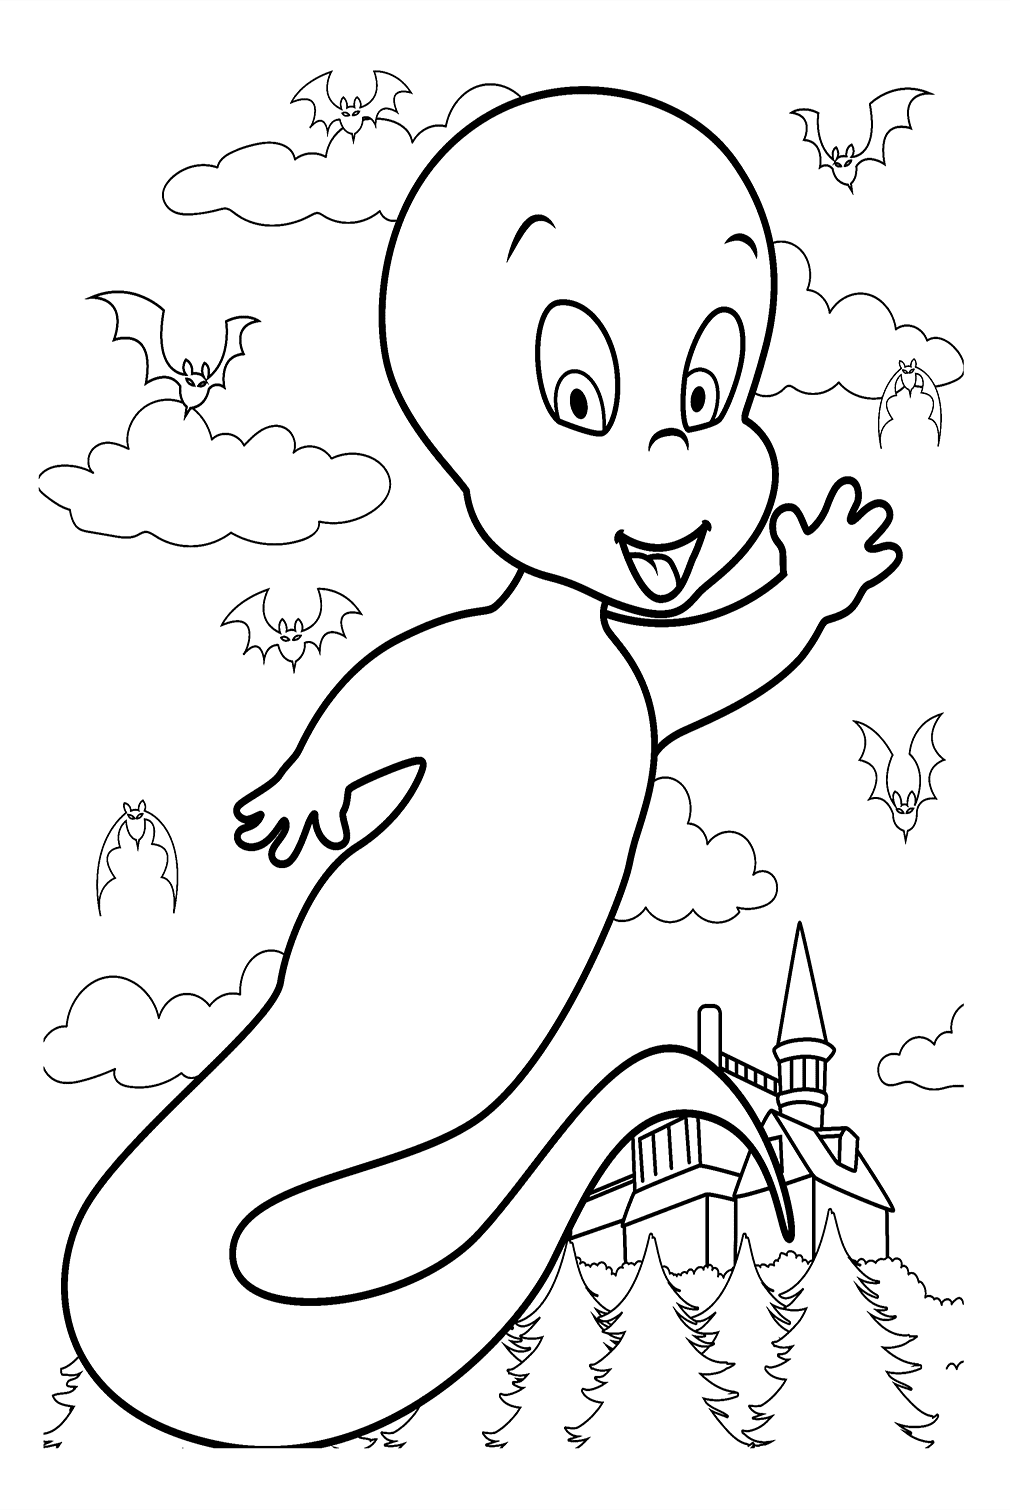 Casper Ghost Coloring Page from Ghost